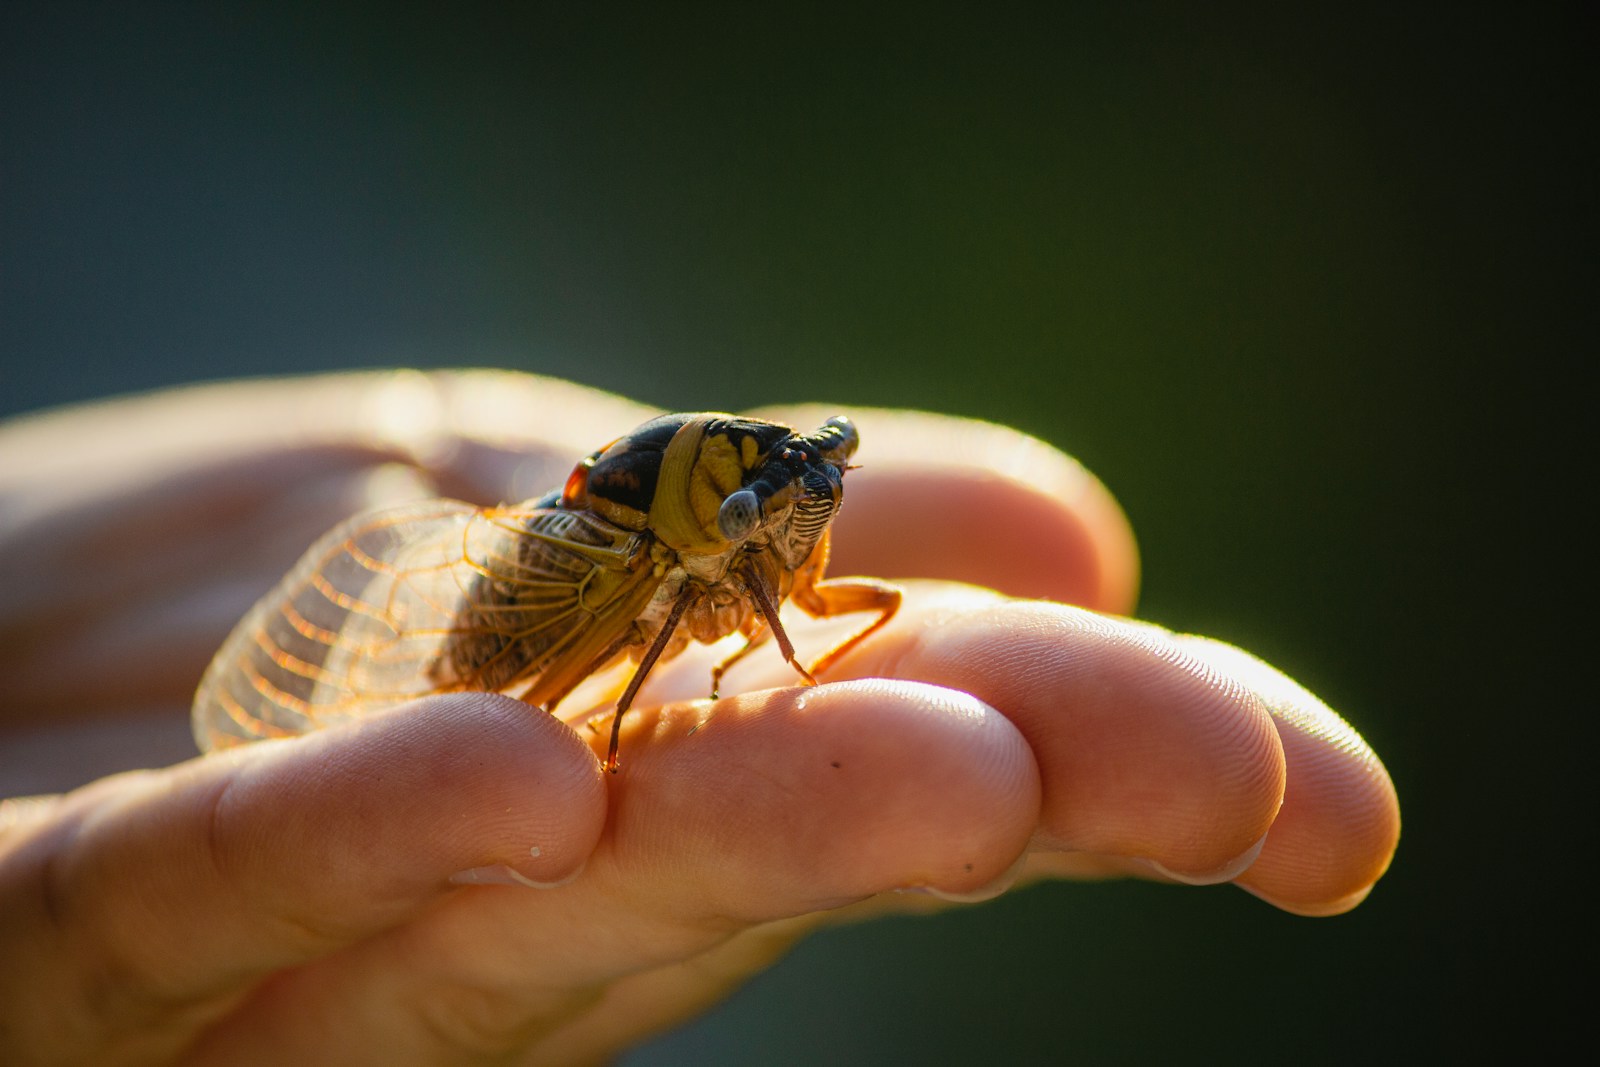 Cicada insect on persons hand